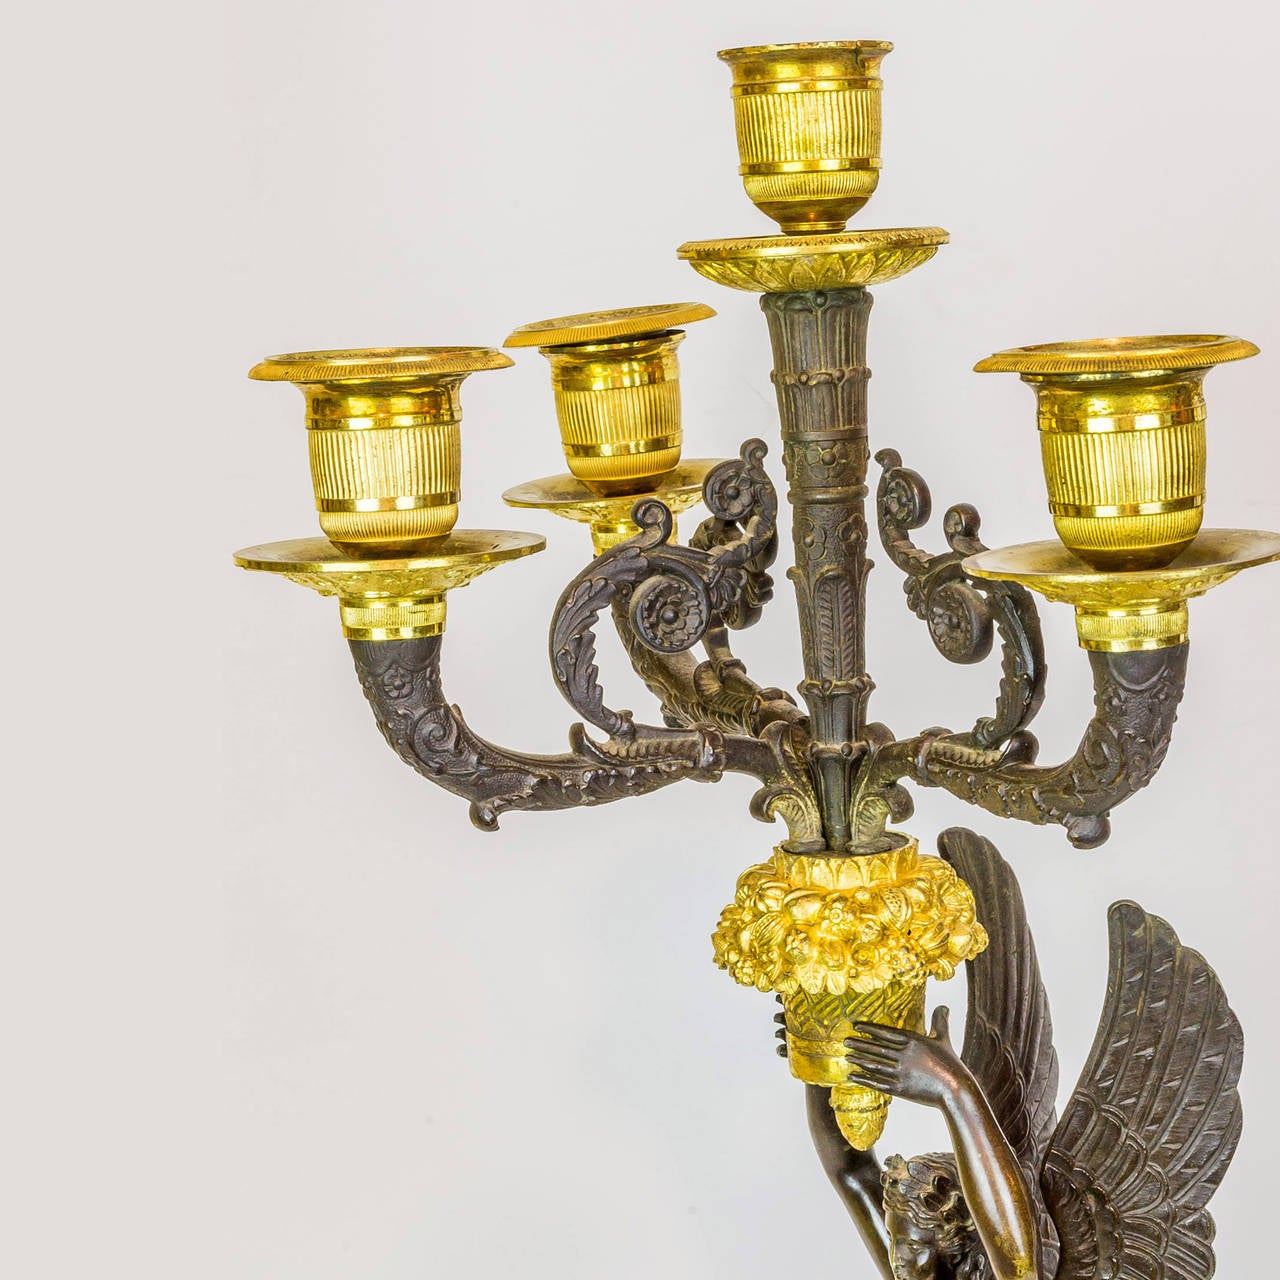 19th Century Pair of Empire Style Gilt and Patinated Bronze Figural Candelabras